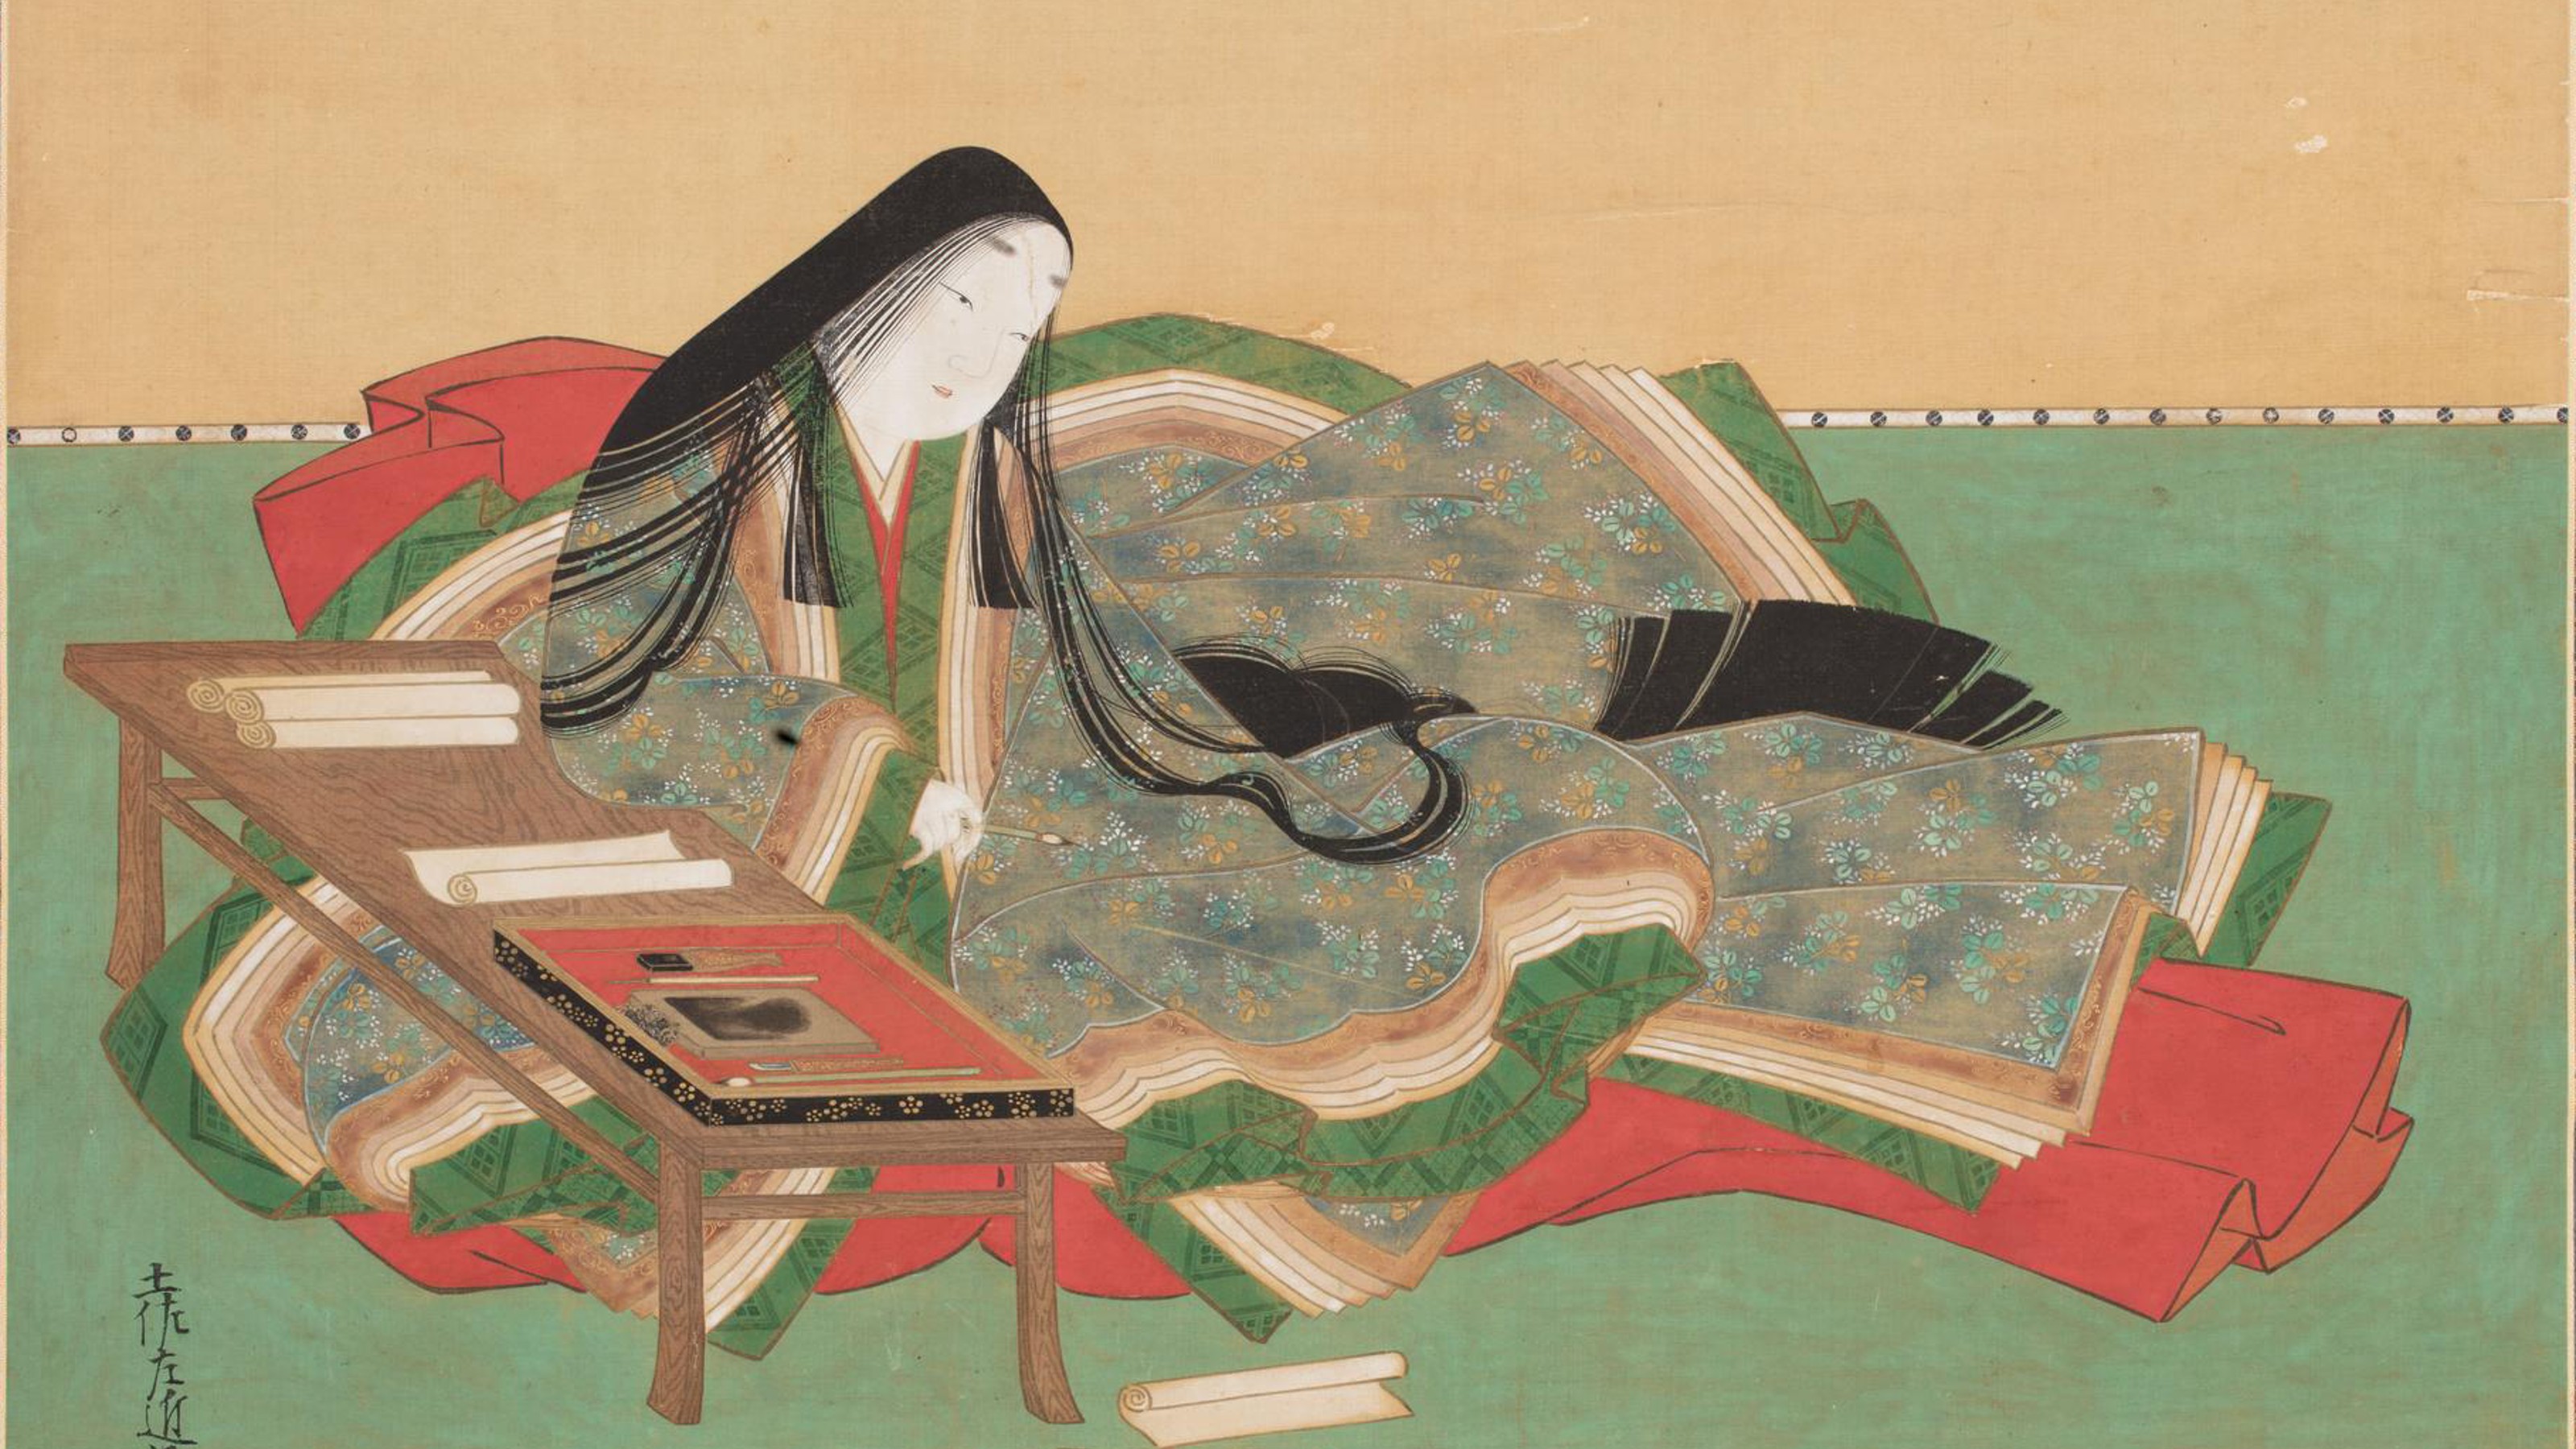 A traditional Japanese painting depicts a woman in a colorful kimono seated on the floor, reading a book beside a small wooden table with scrolls and an ink set.